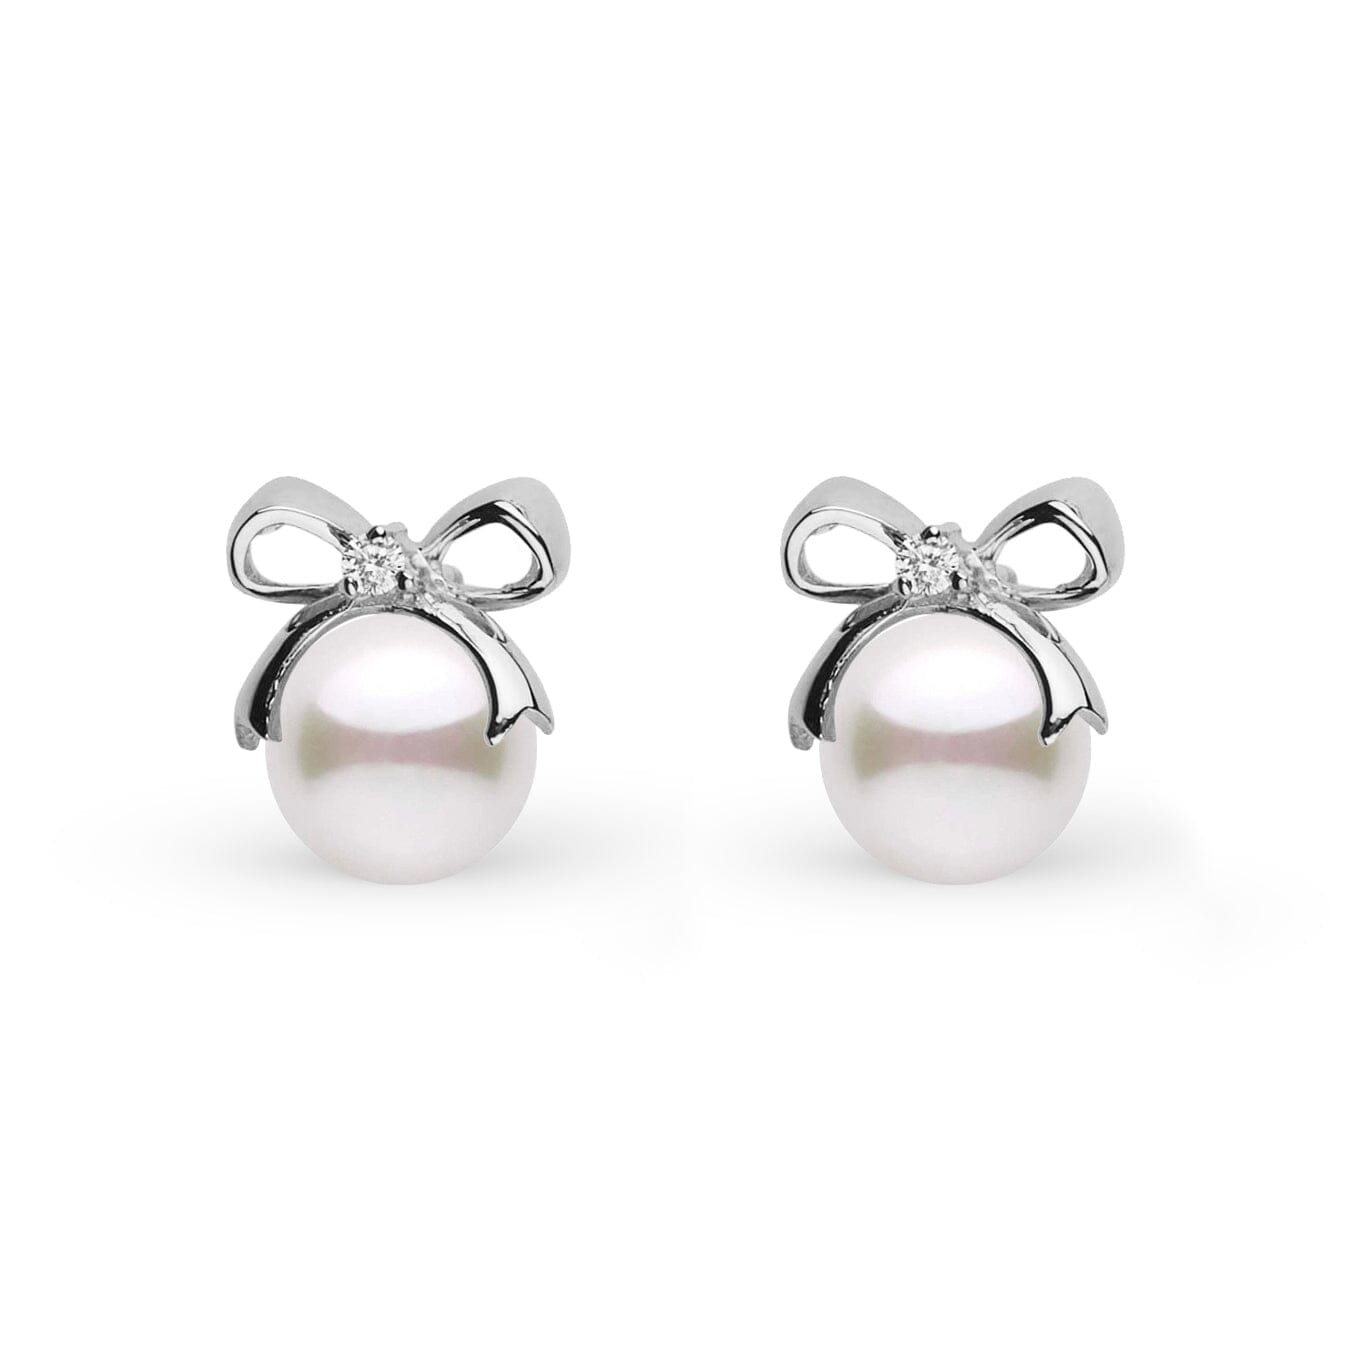 Perfect Gift Collection 7.0-7.5 mm Akoya Pearl and Diamond Earrings